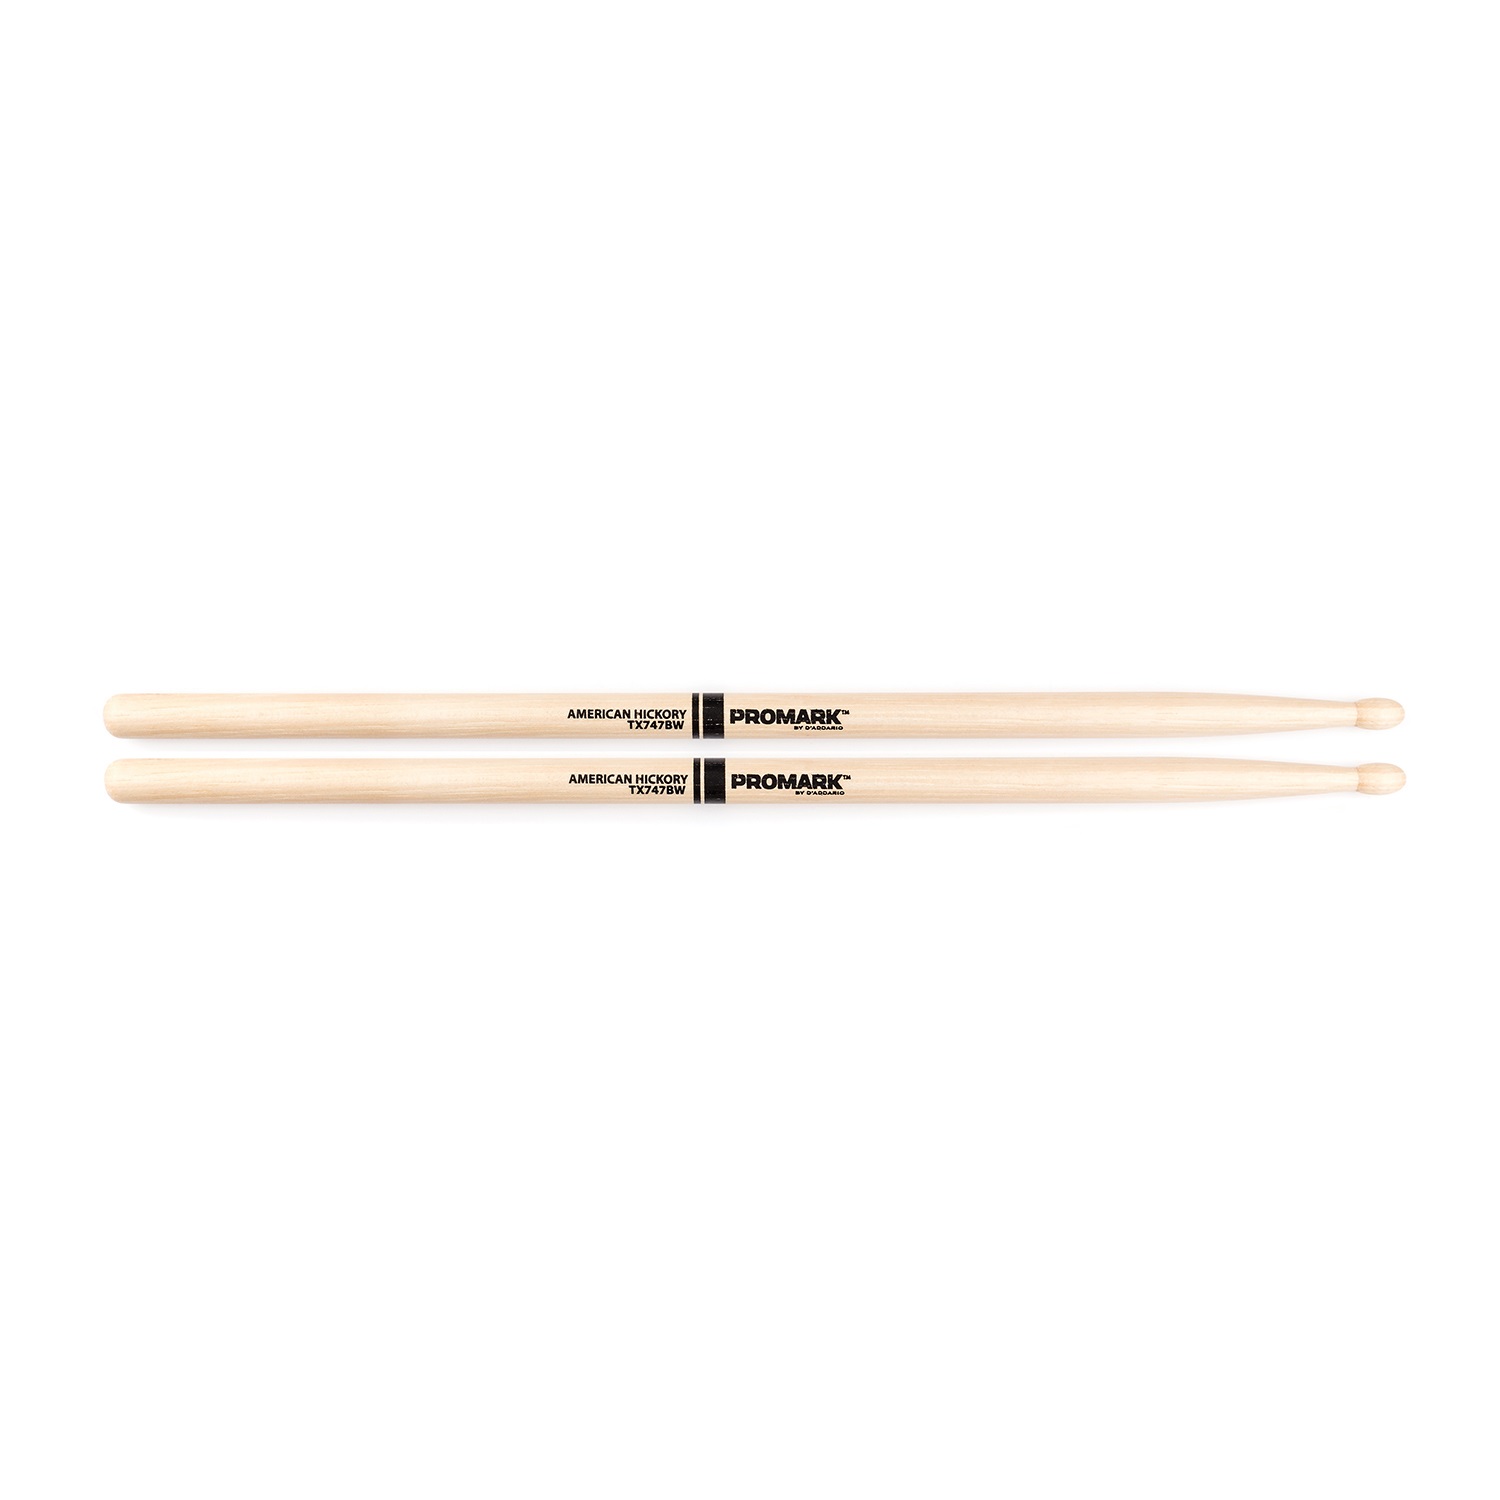 An image of Promark Hickory 747B "Super Rock" Wood Tip Drumstick Pair